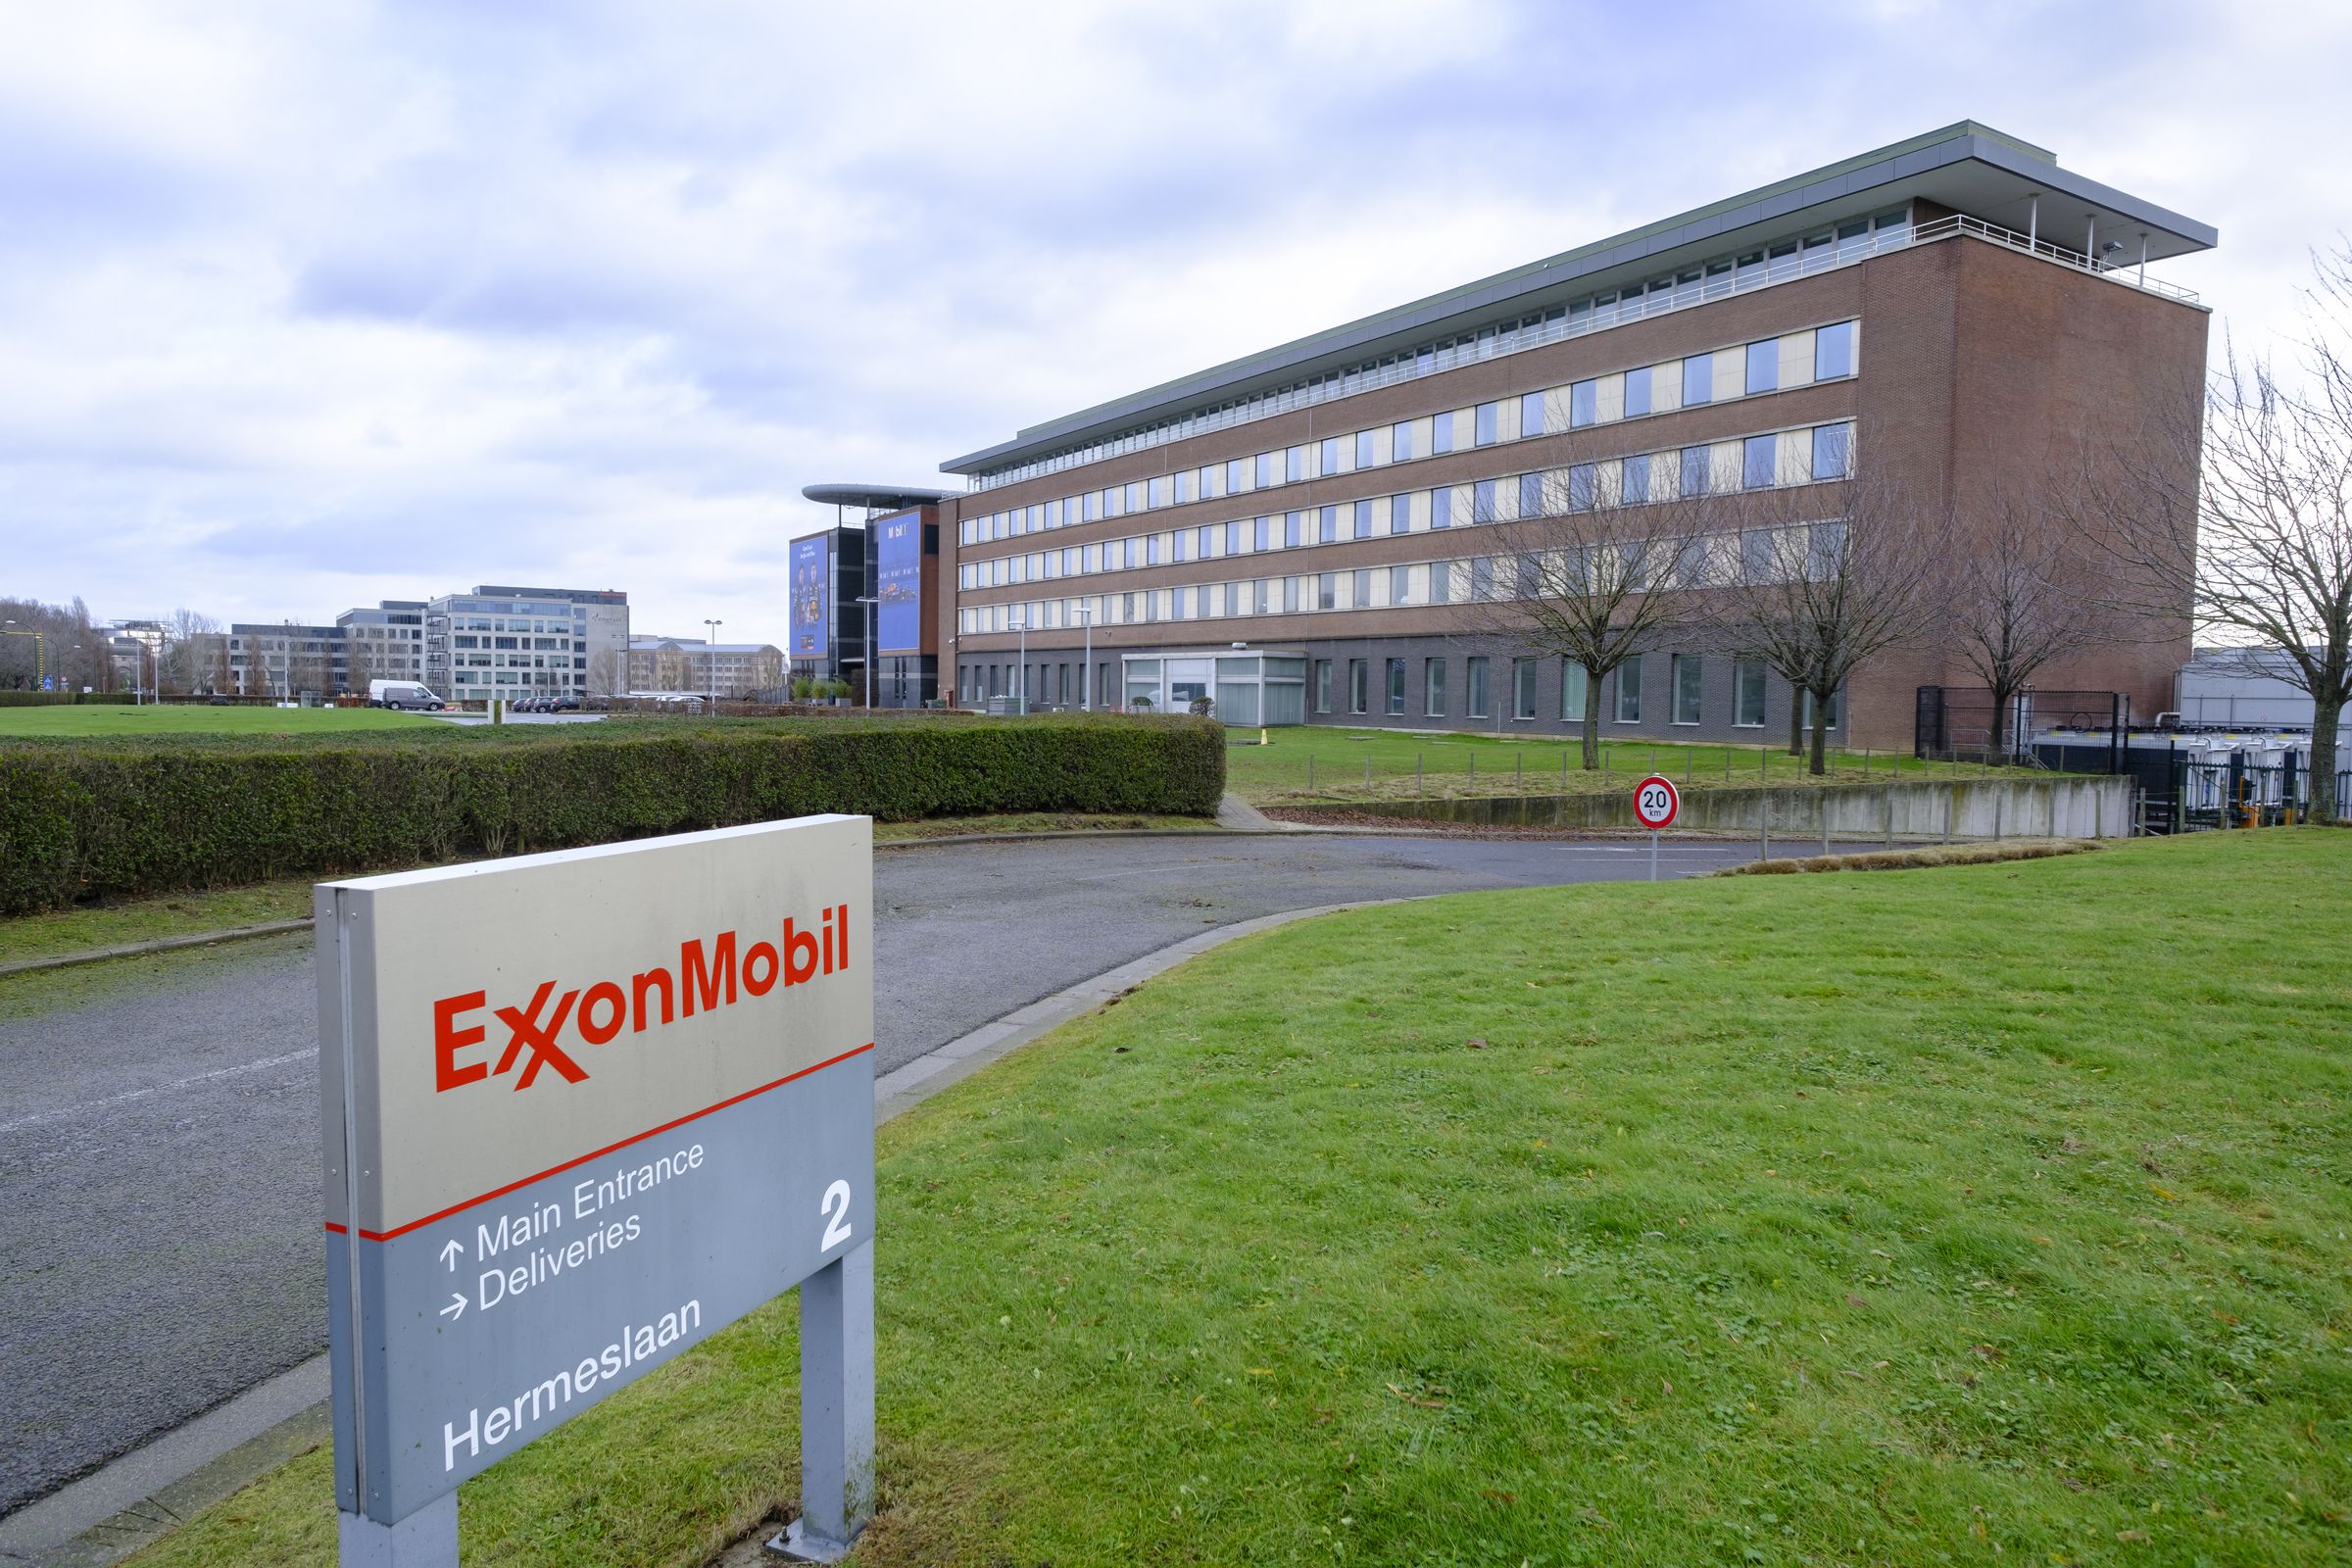 A sign with the ExxonMobil logo in the foreground with a large office building in the background.